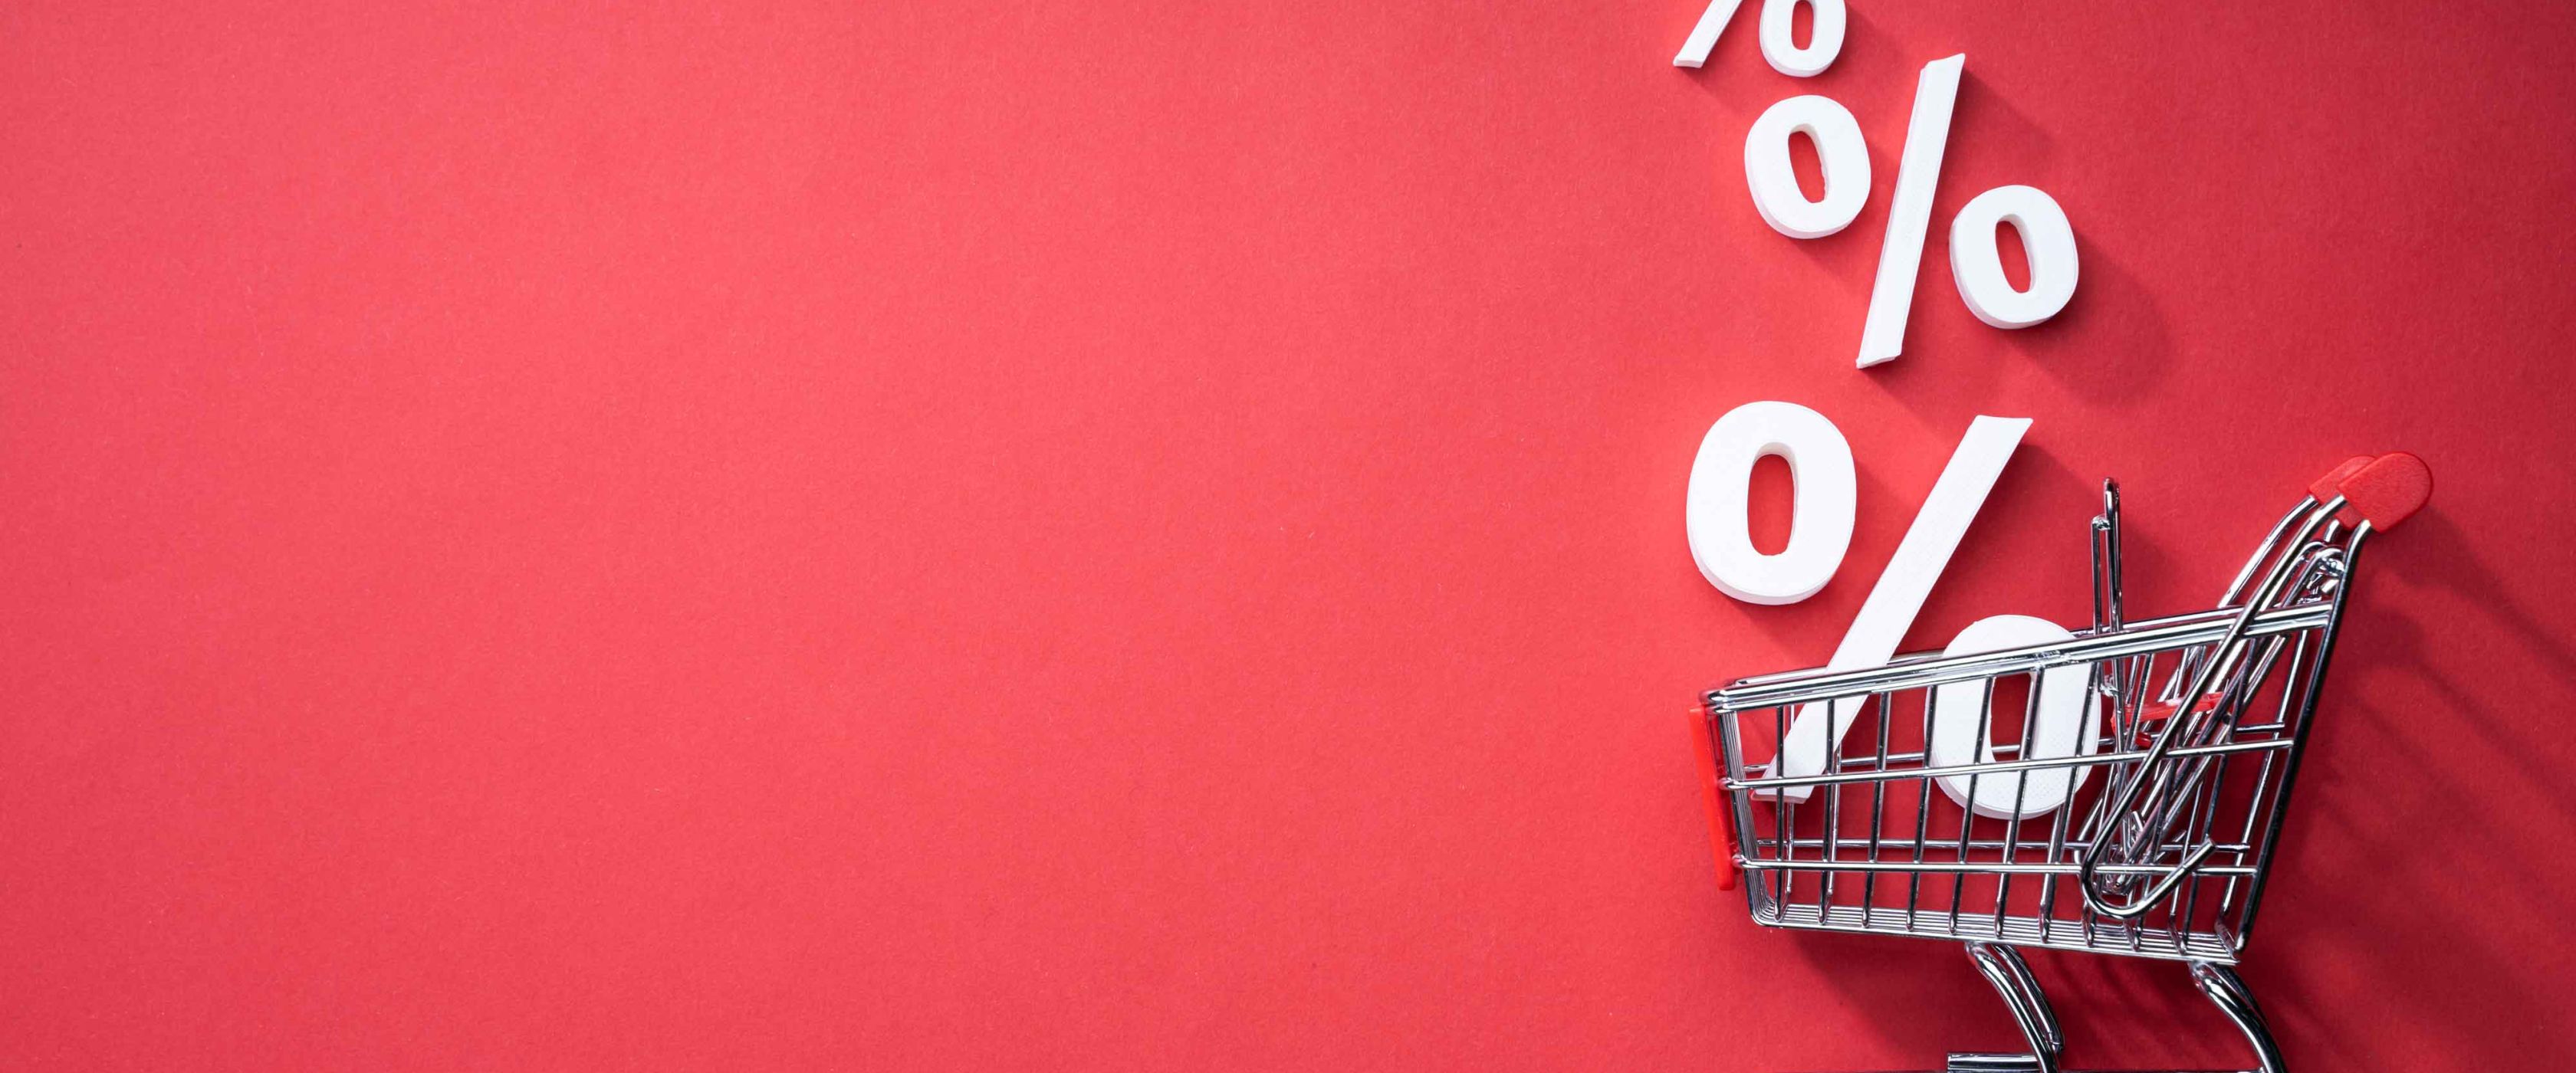 Shopping cart with percentage signs